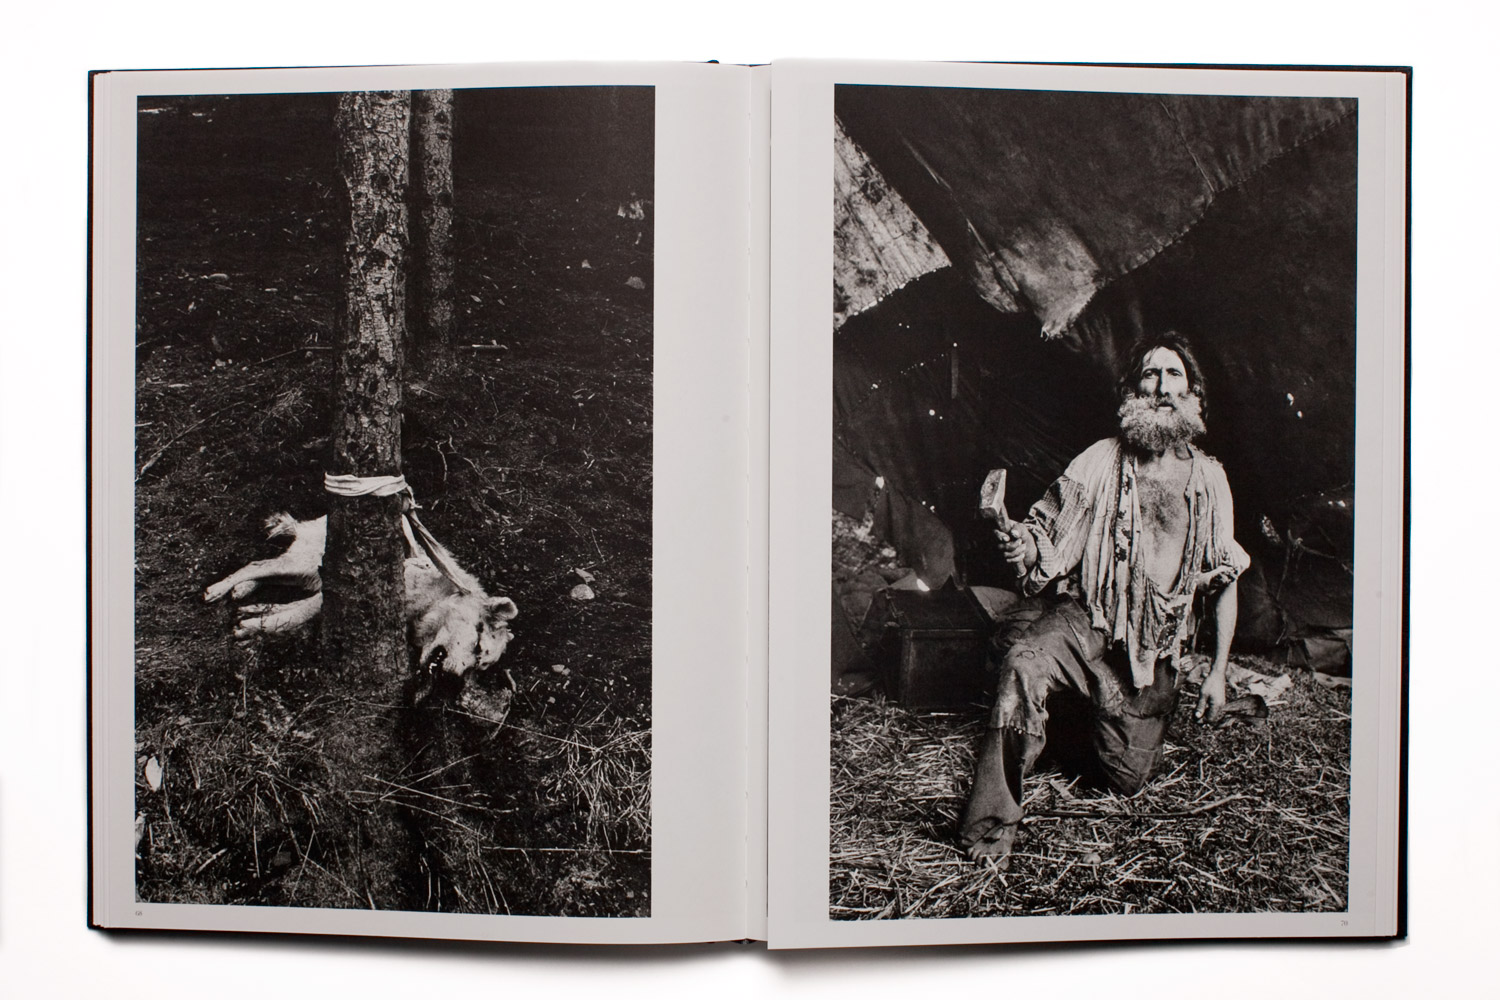 The new book juxtaposes vertical images and horizontal images across the spreads.